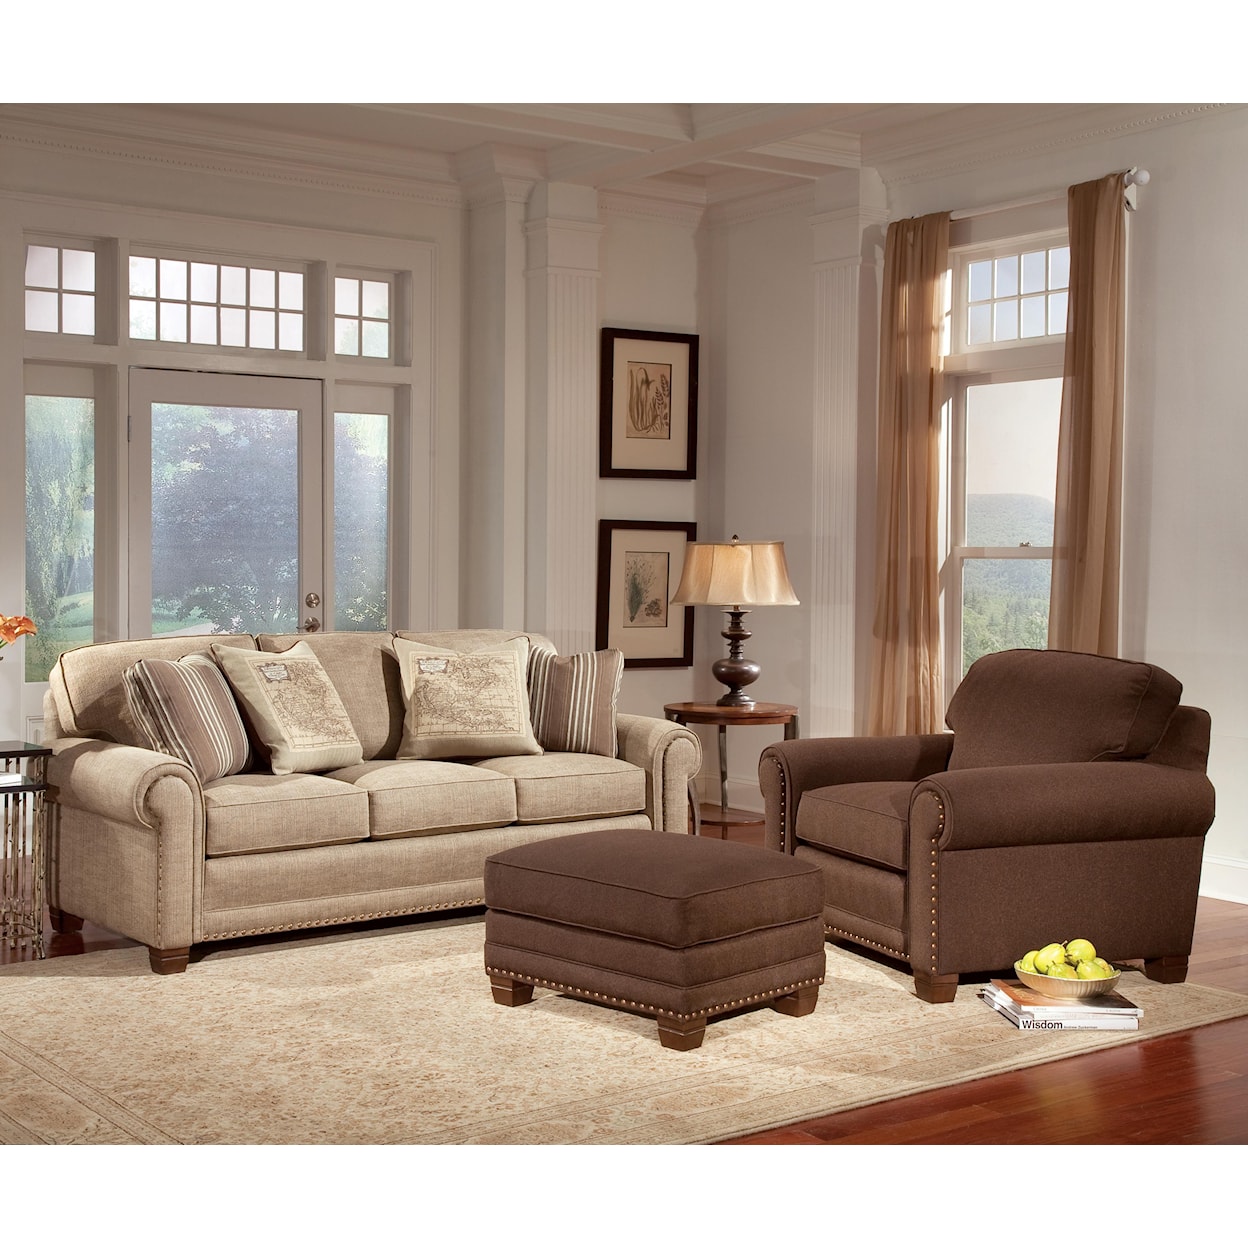 Smith Brothers 393 Stationary Living Room Group